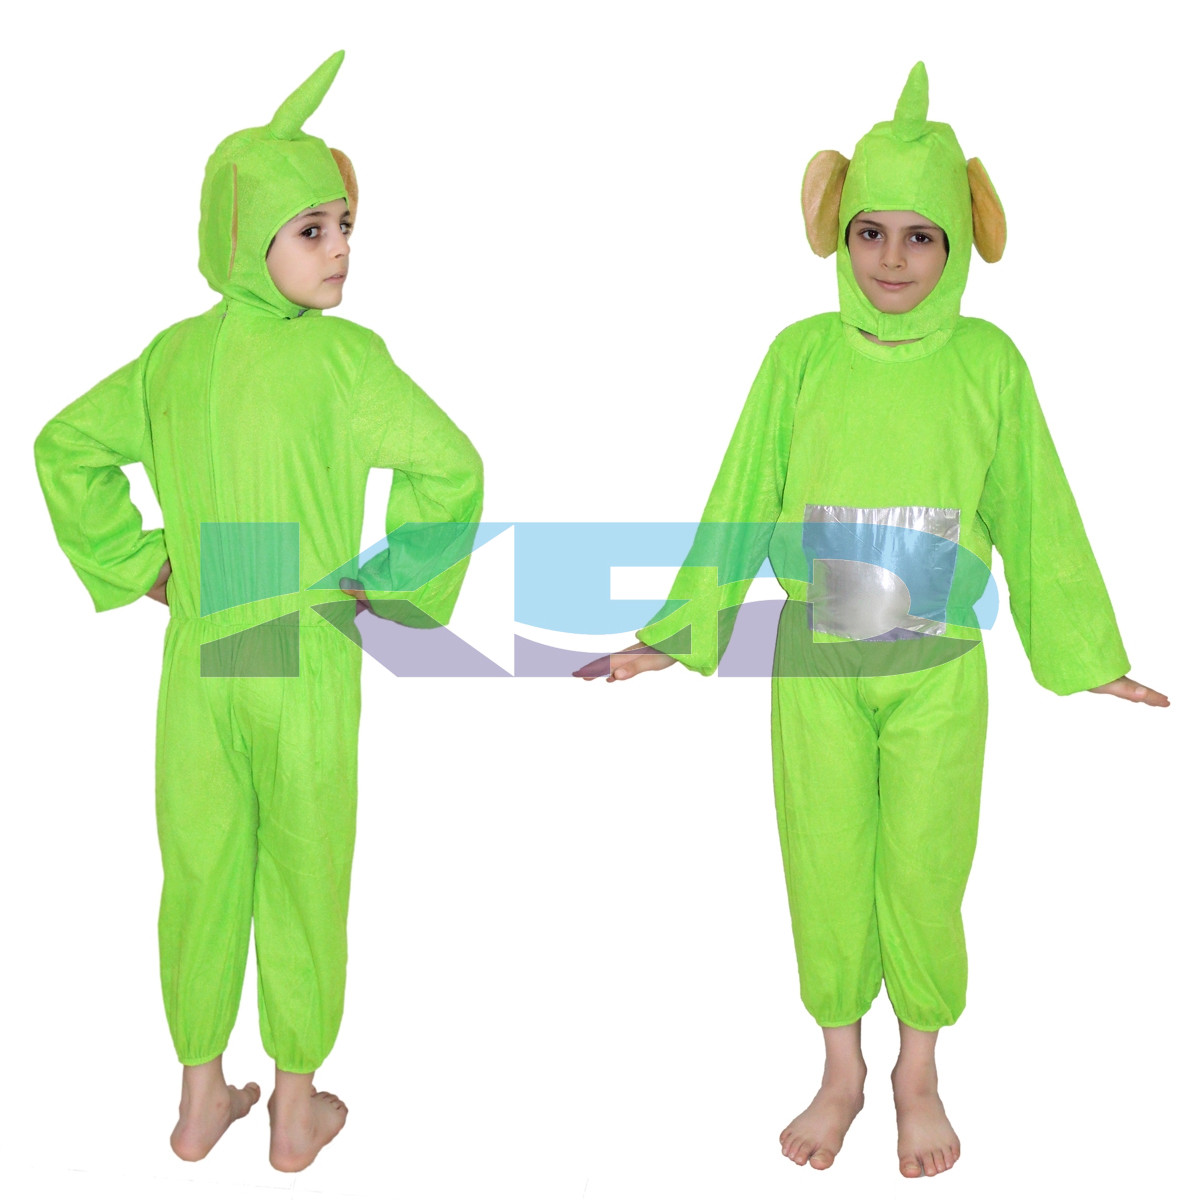  Teletubbies Green Cartoon Costume For School Annual function/Theme Party/Competition/Stage Shows/Birthday Party Dress